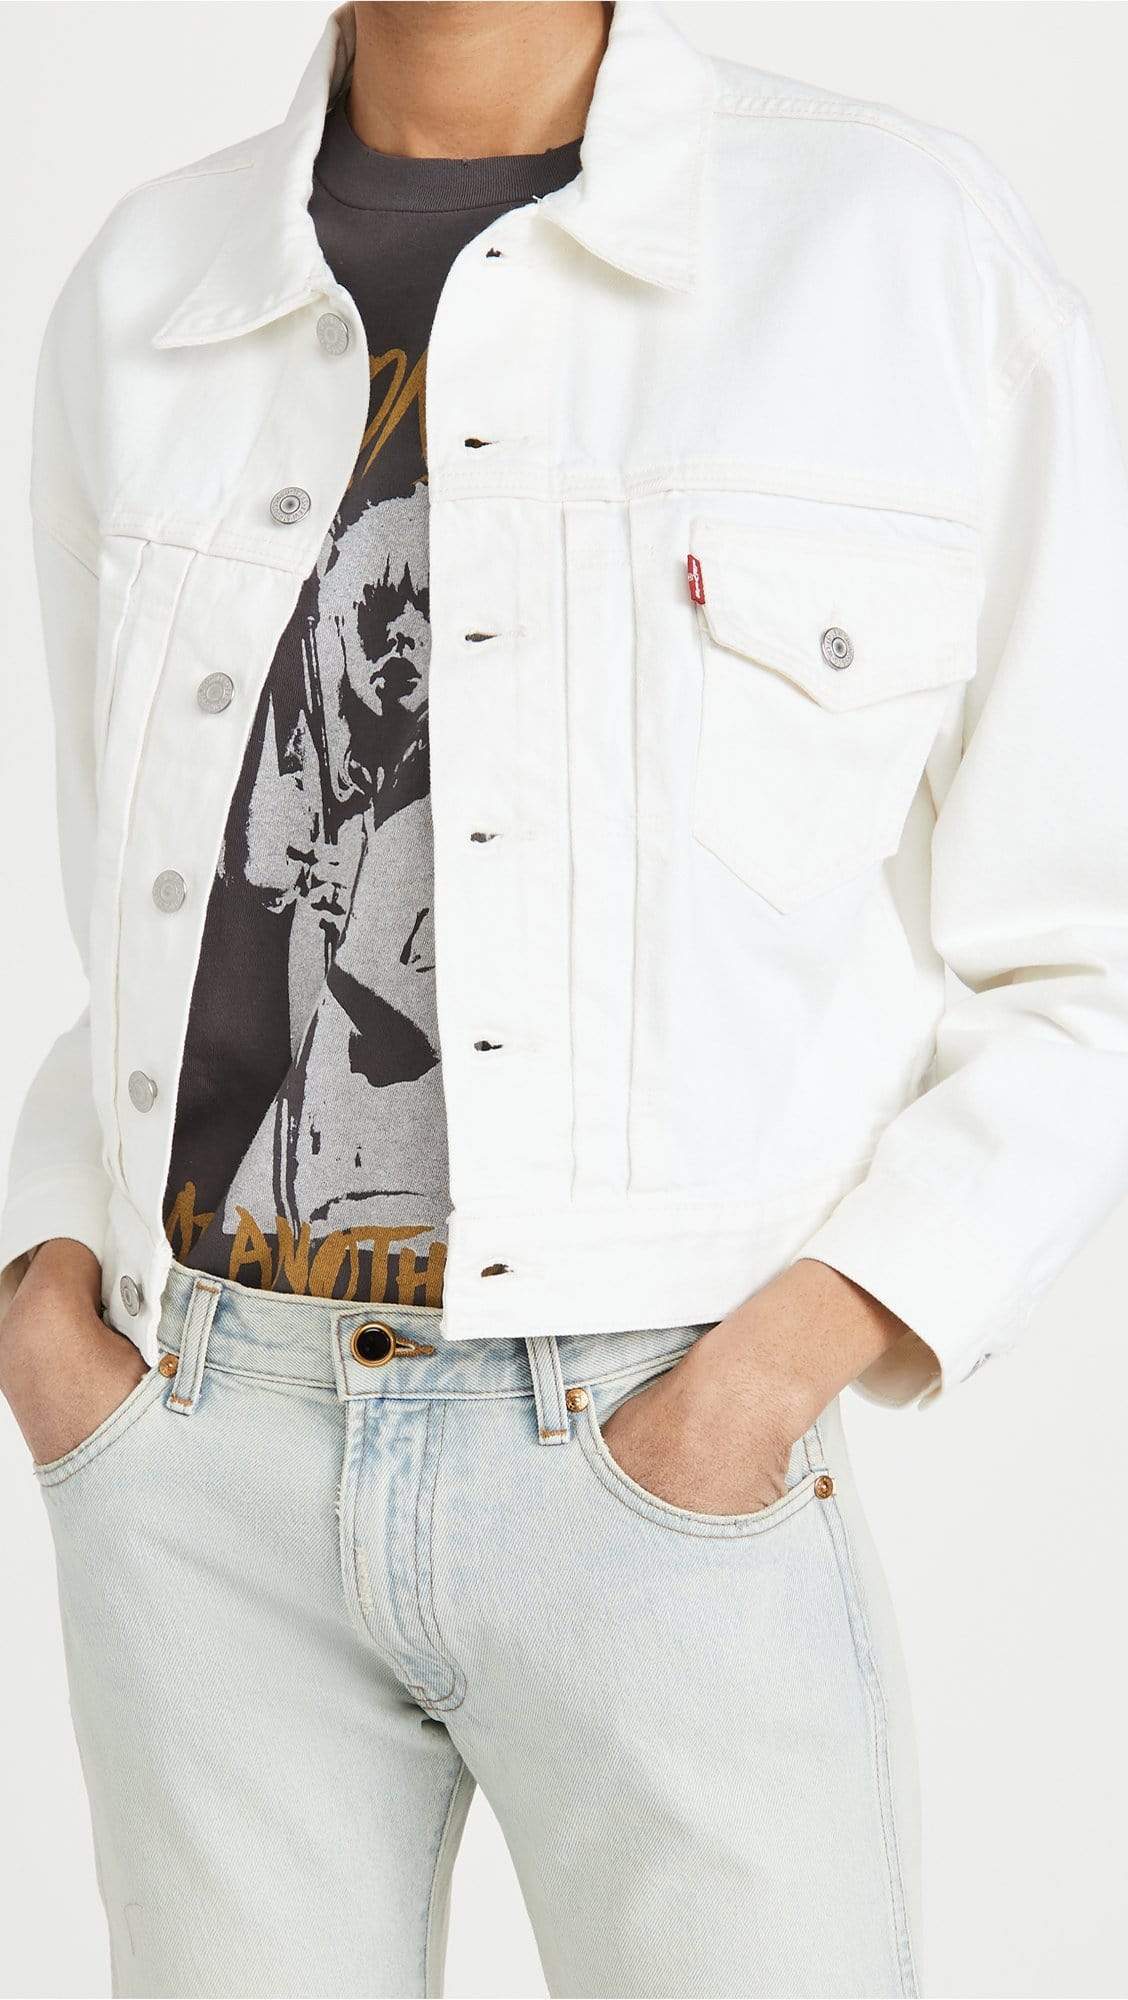 Levi's Trucker Jacket in Clean Sweep - Madison's Niche 